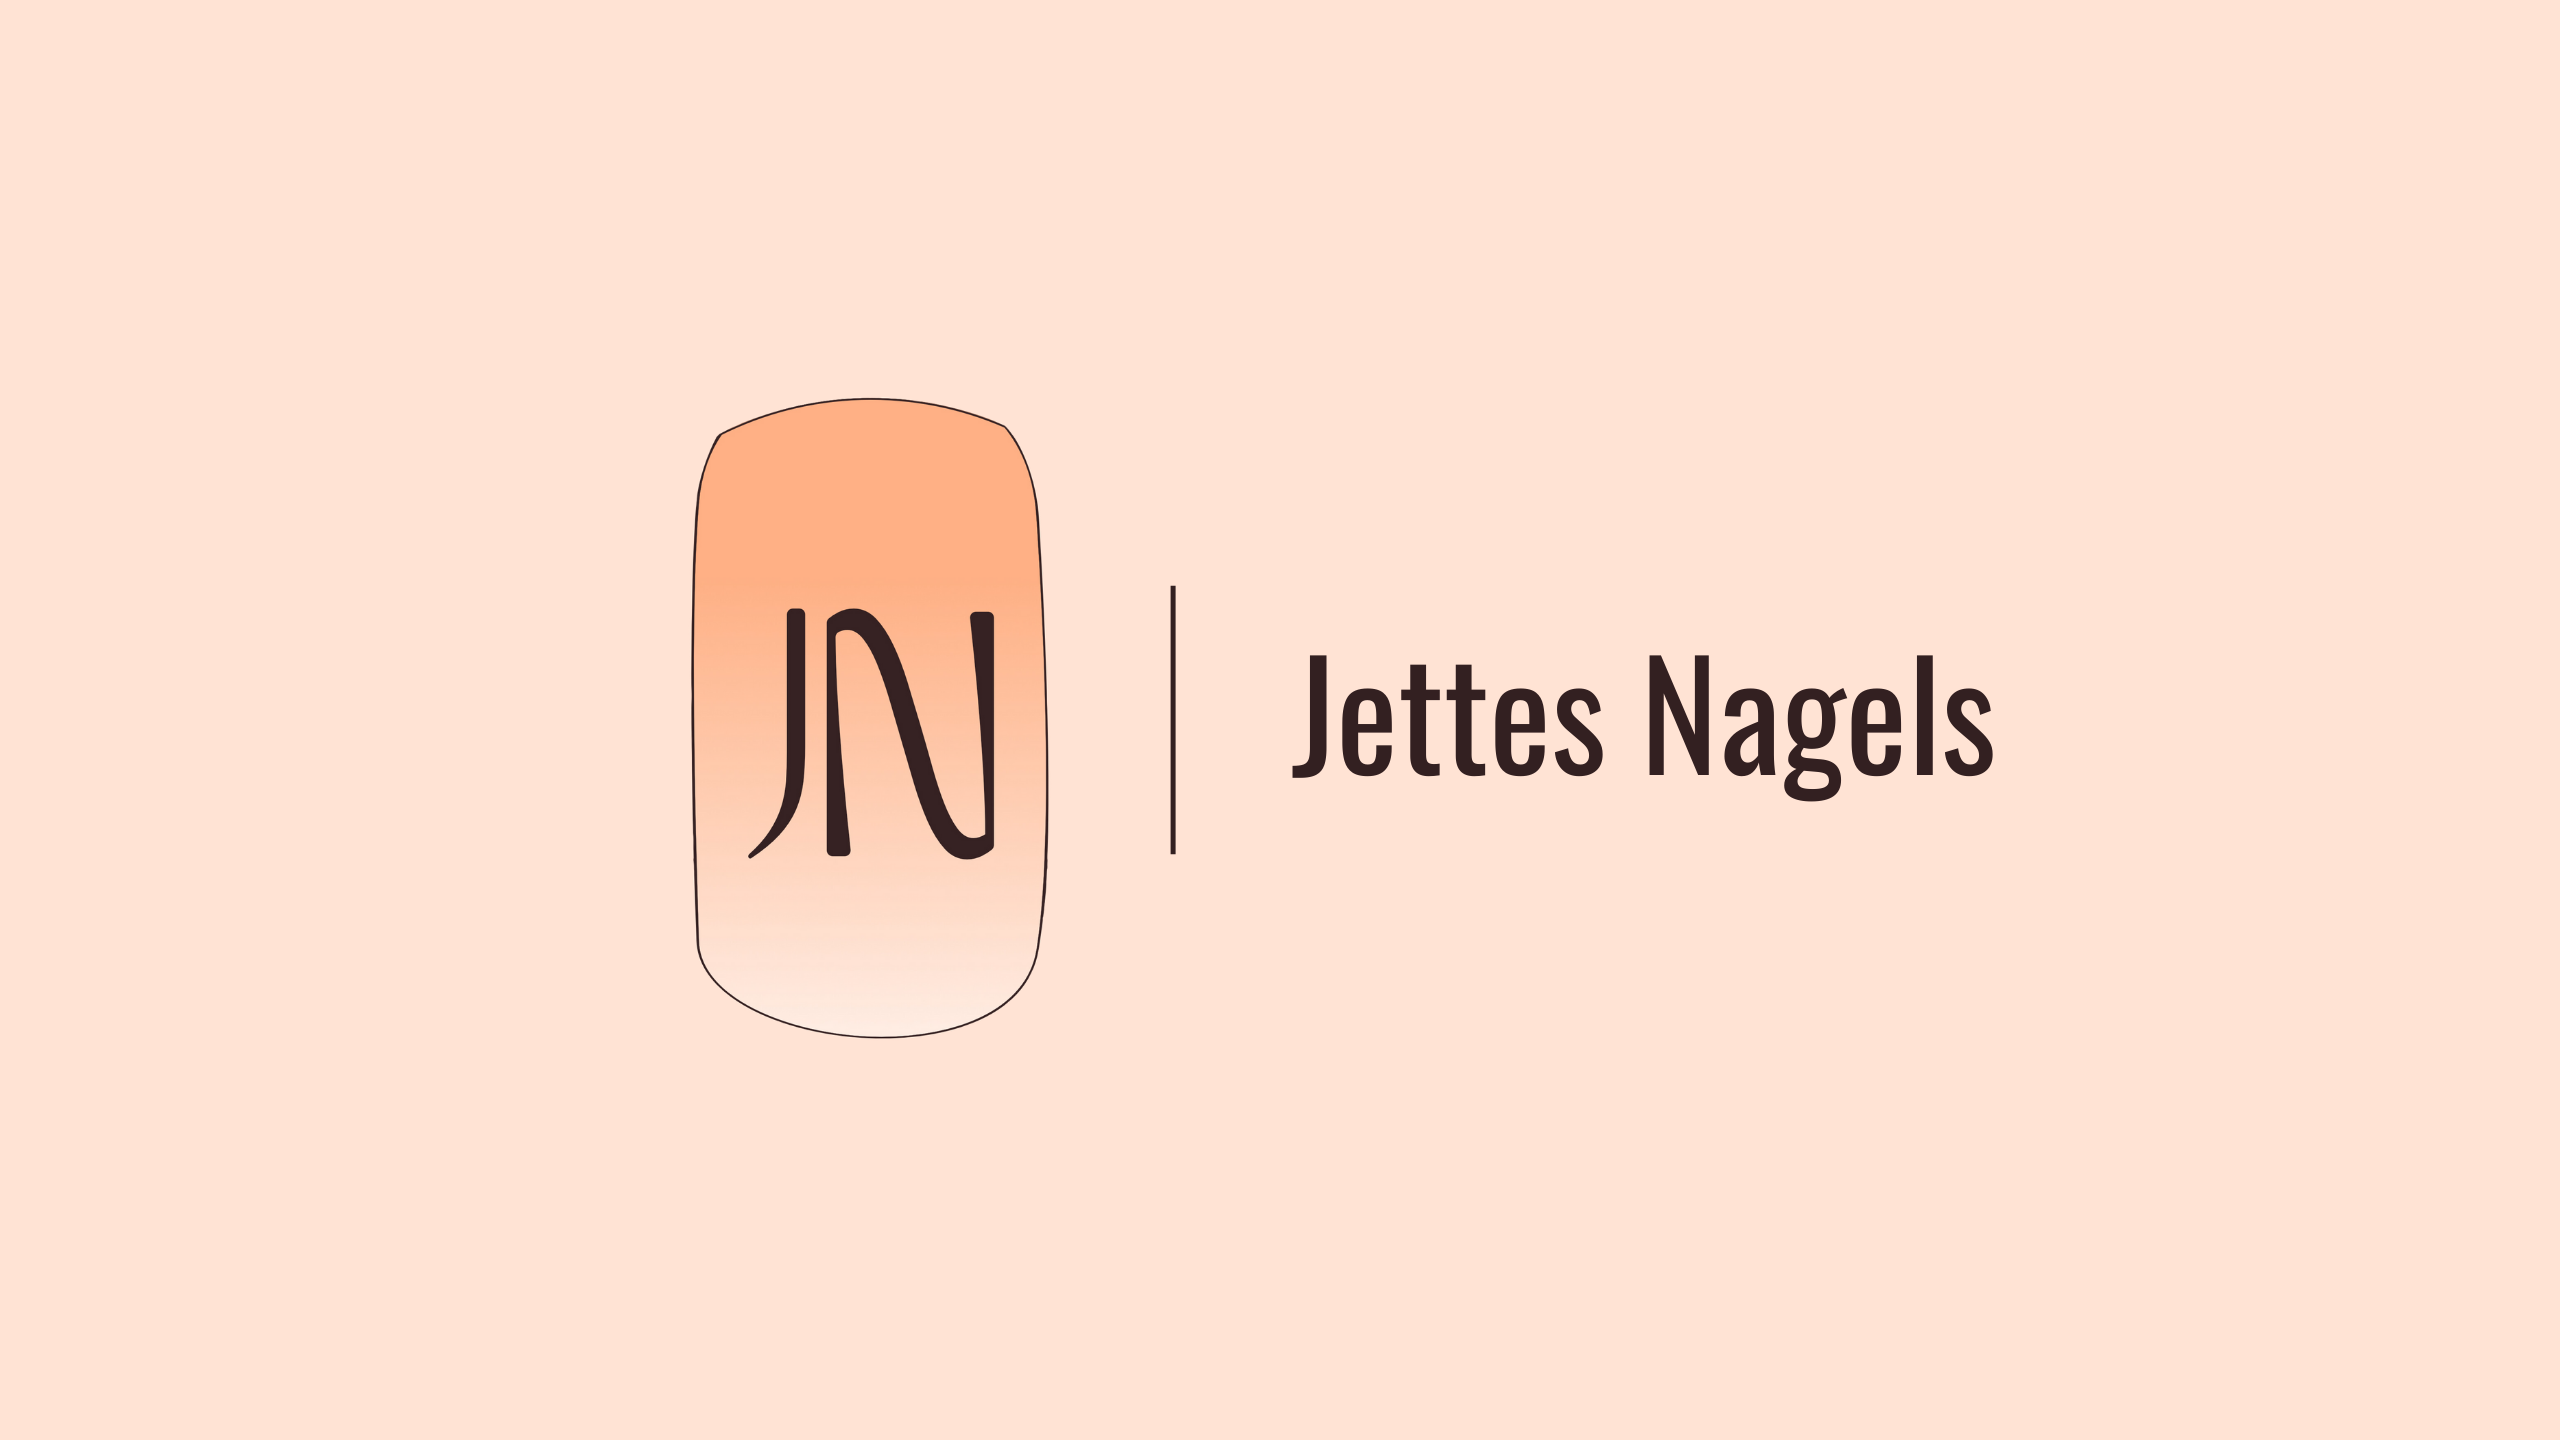 Logo of Jettes Nagels, a local nail studio in Hoorn, Netherlands